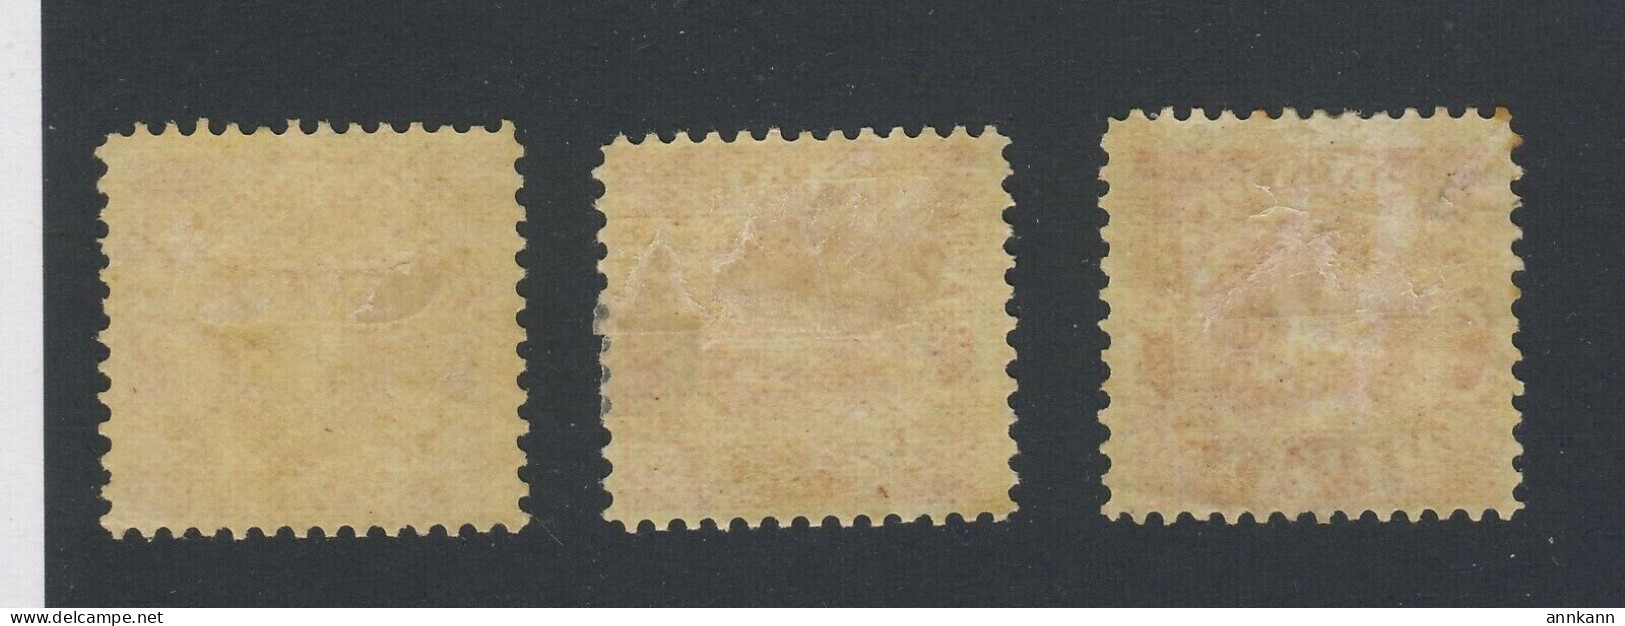 3x Newfoundland Mint Dog Stamps #56 -1/2c MH All Are F/VF Guide Value = $52.00 - 1857-1861